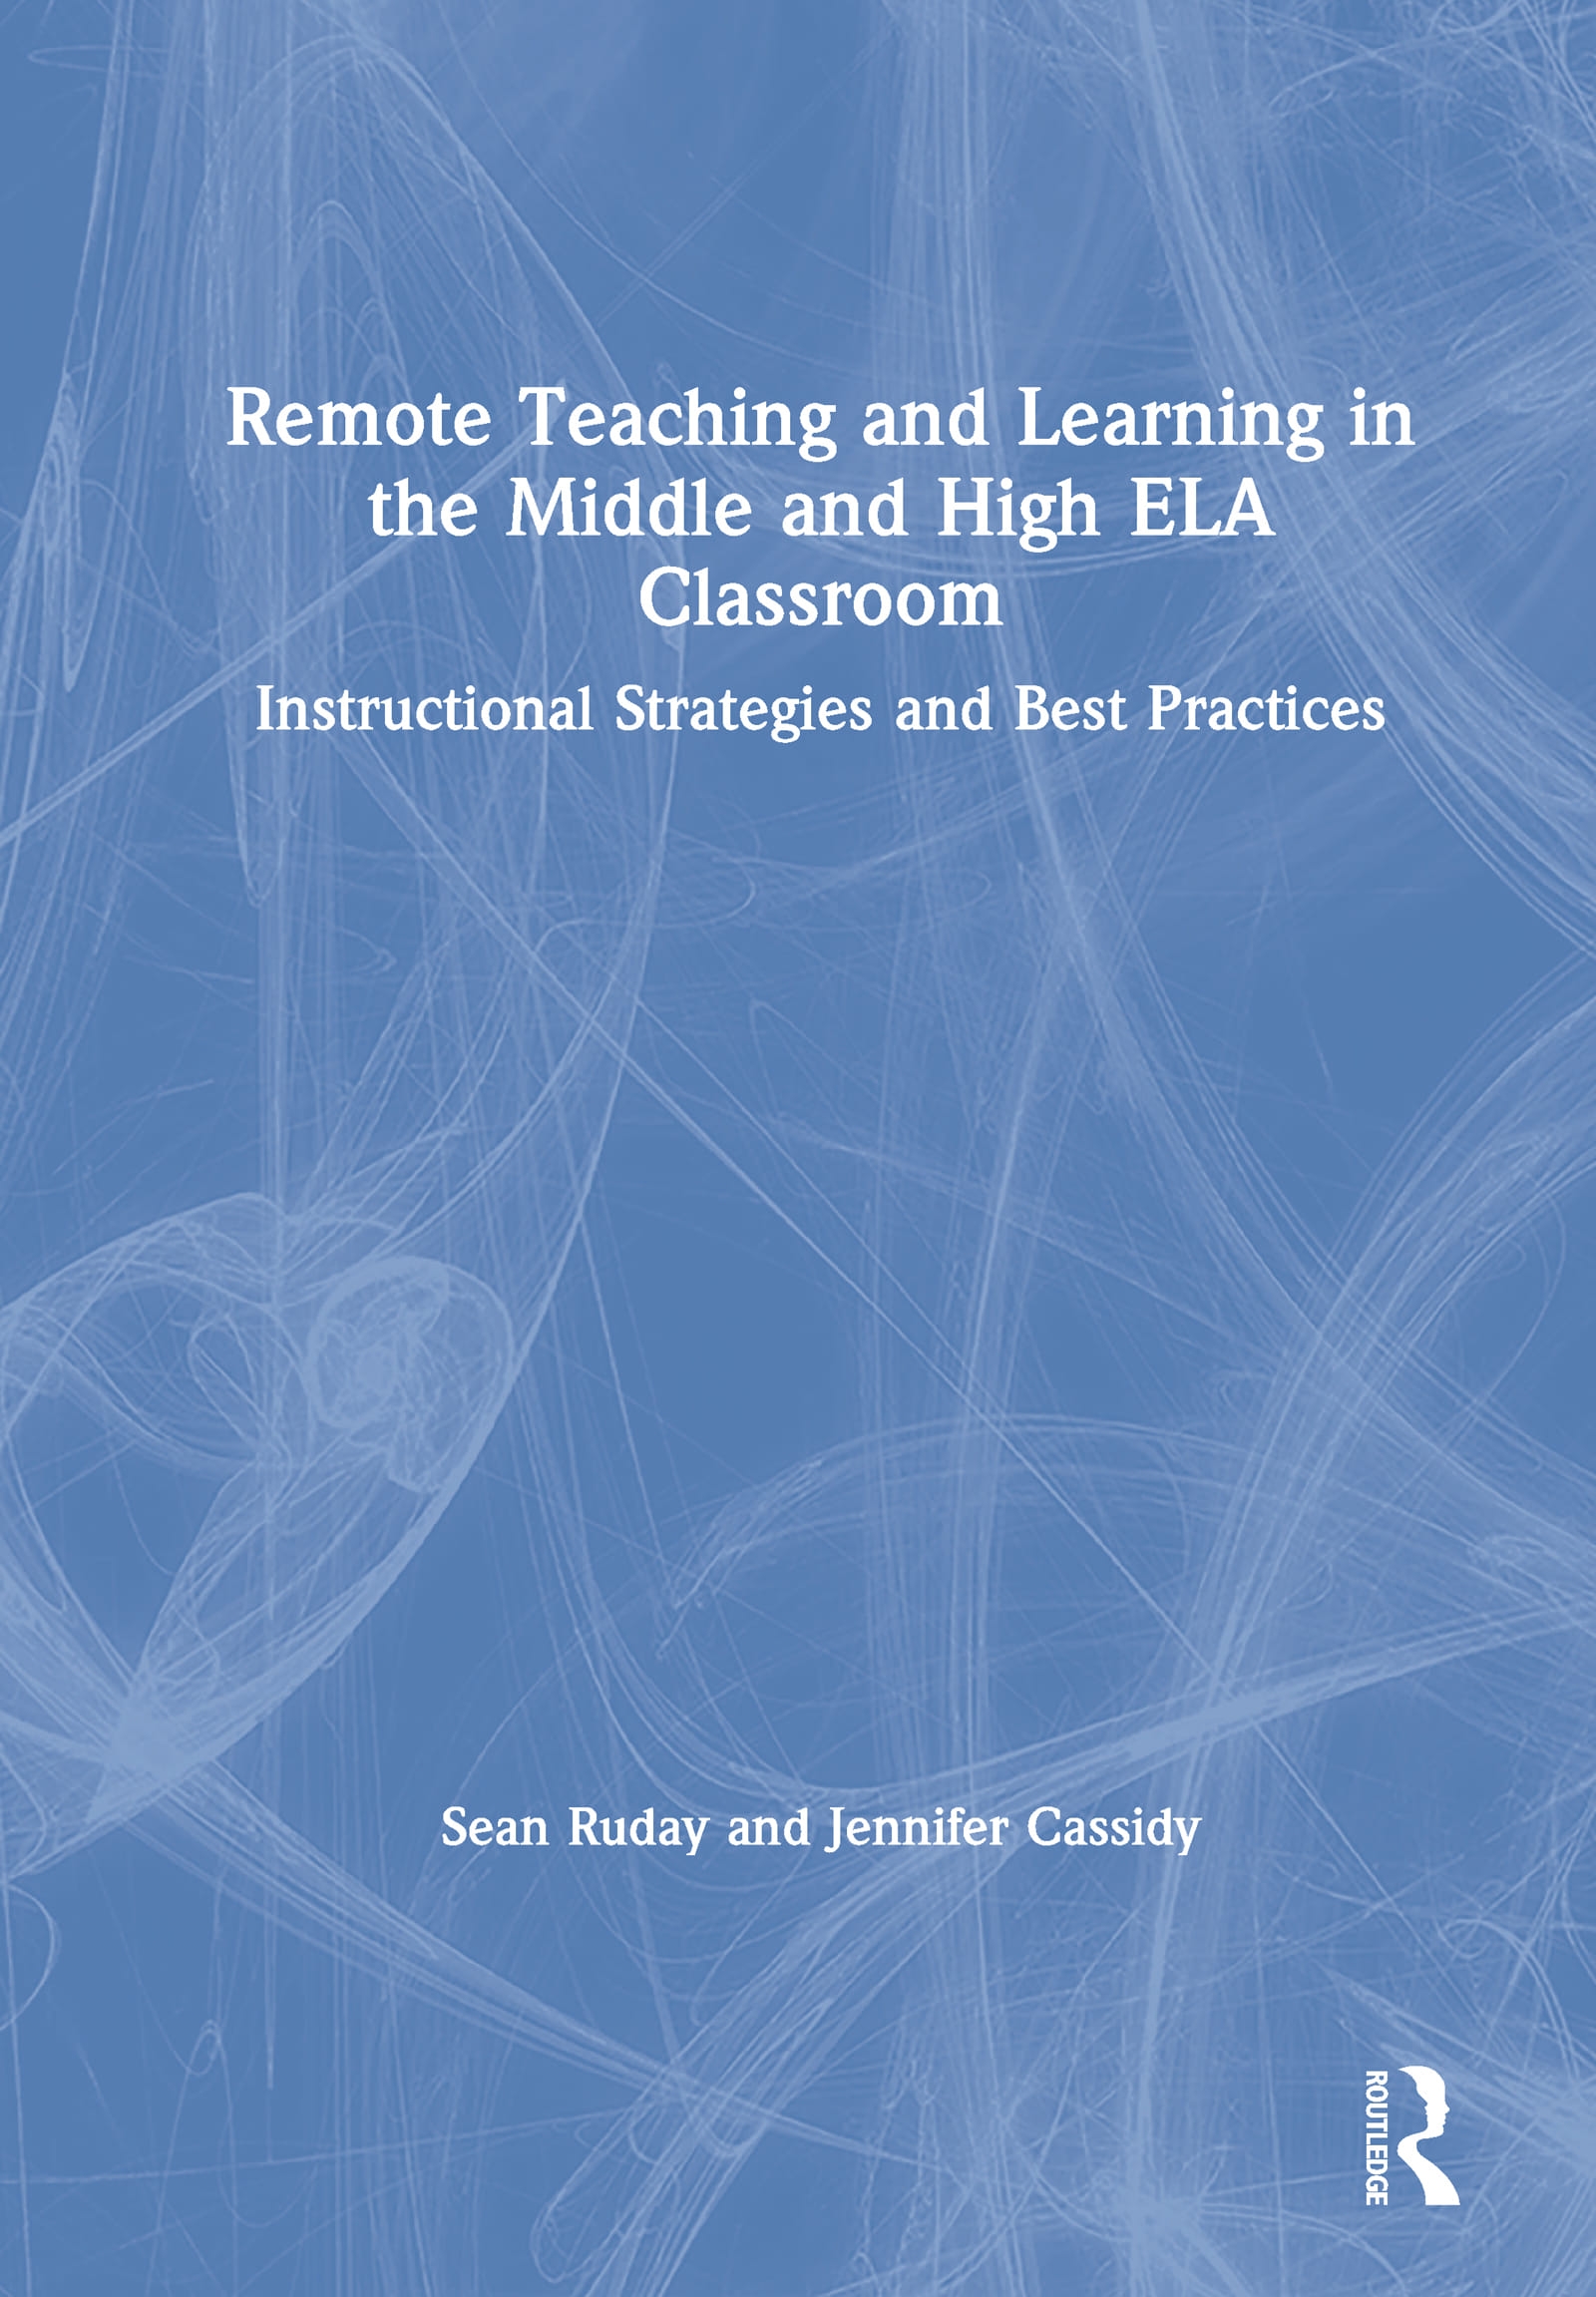 Remote Teaching and Learning in the Middle and High Ela Classroom: Instructional Strategies and Best Practices